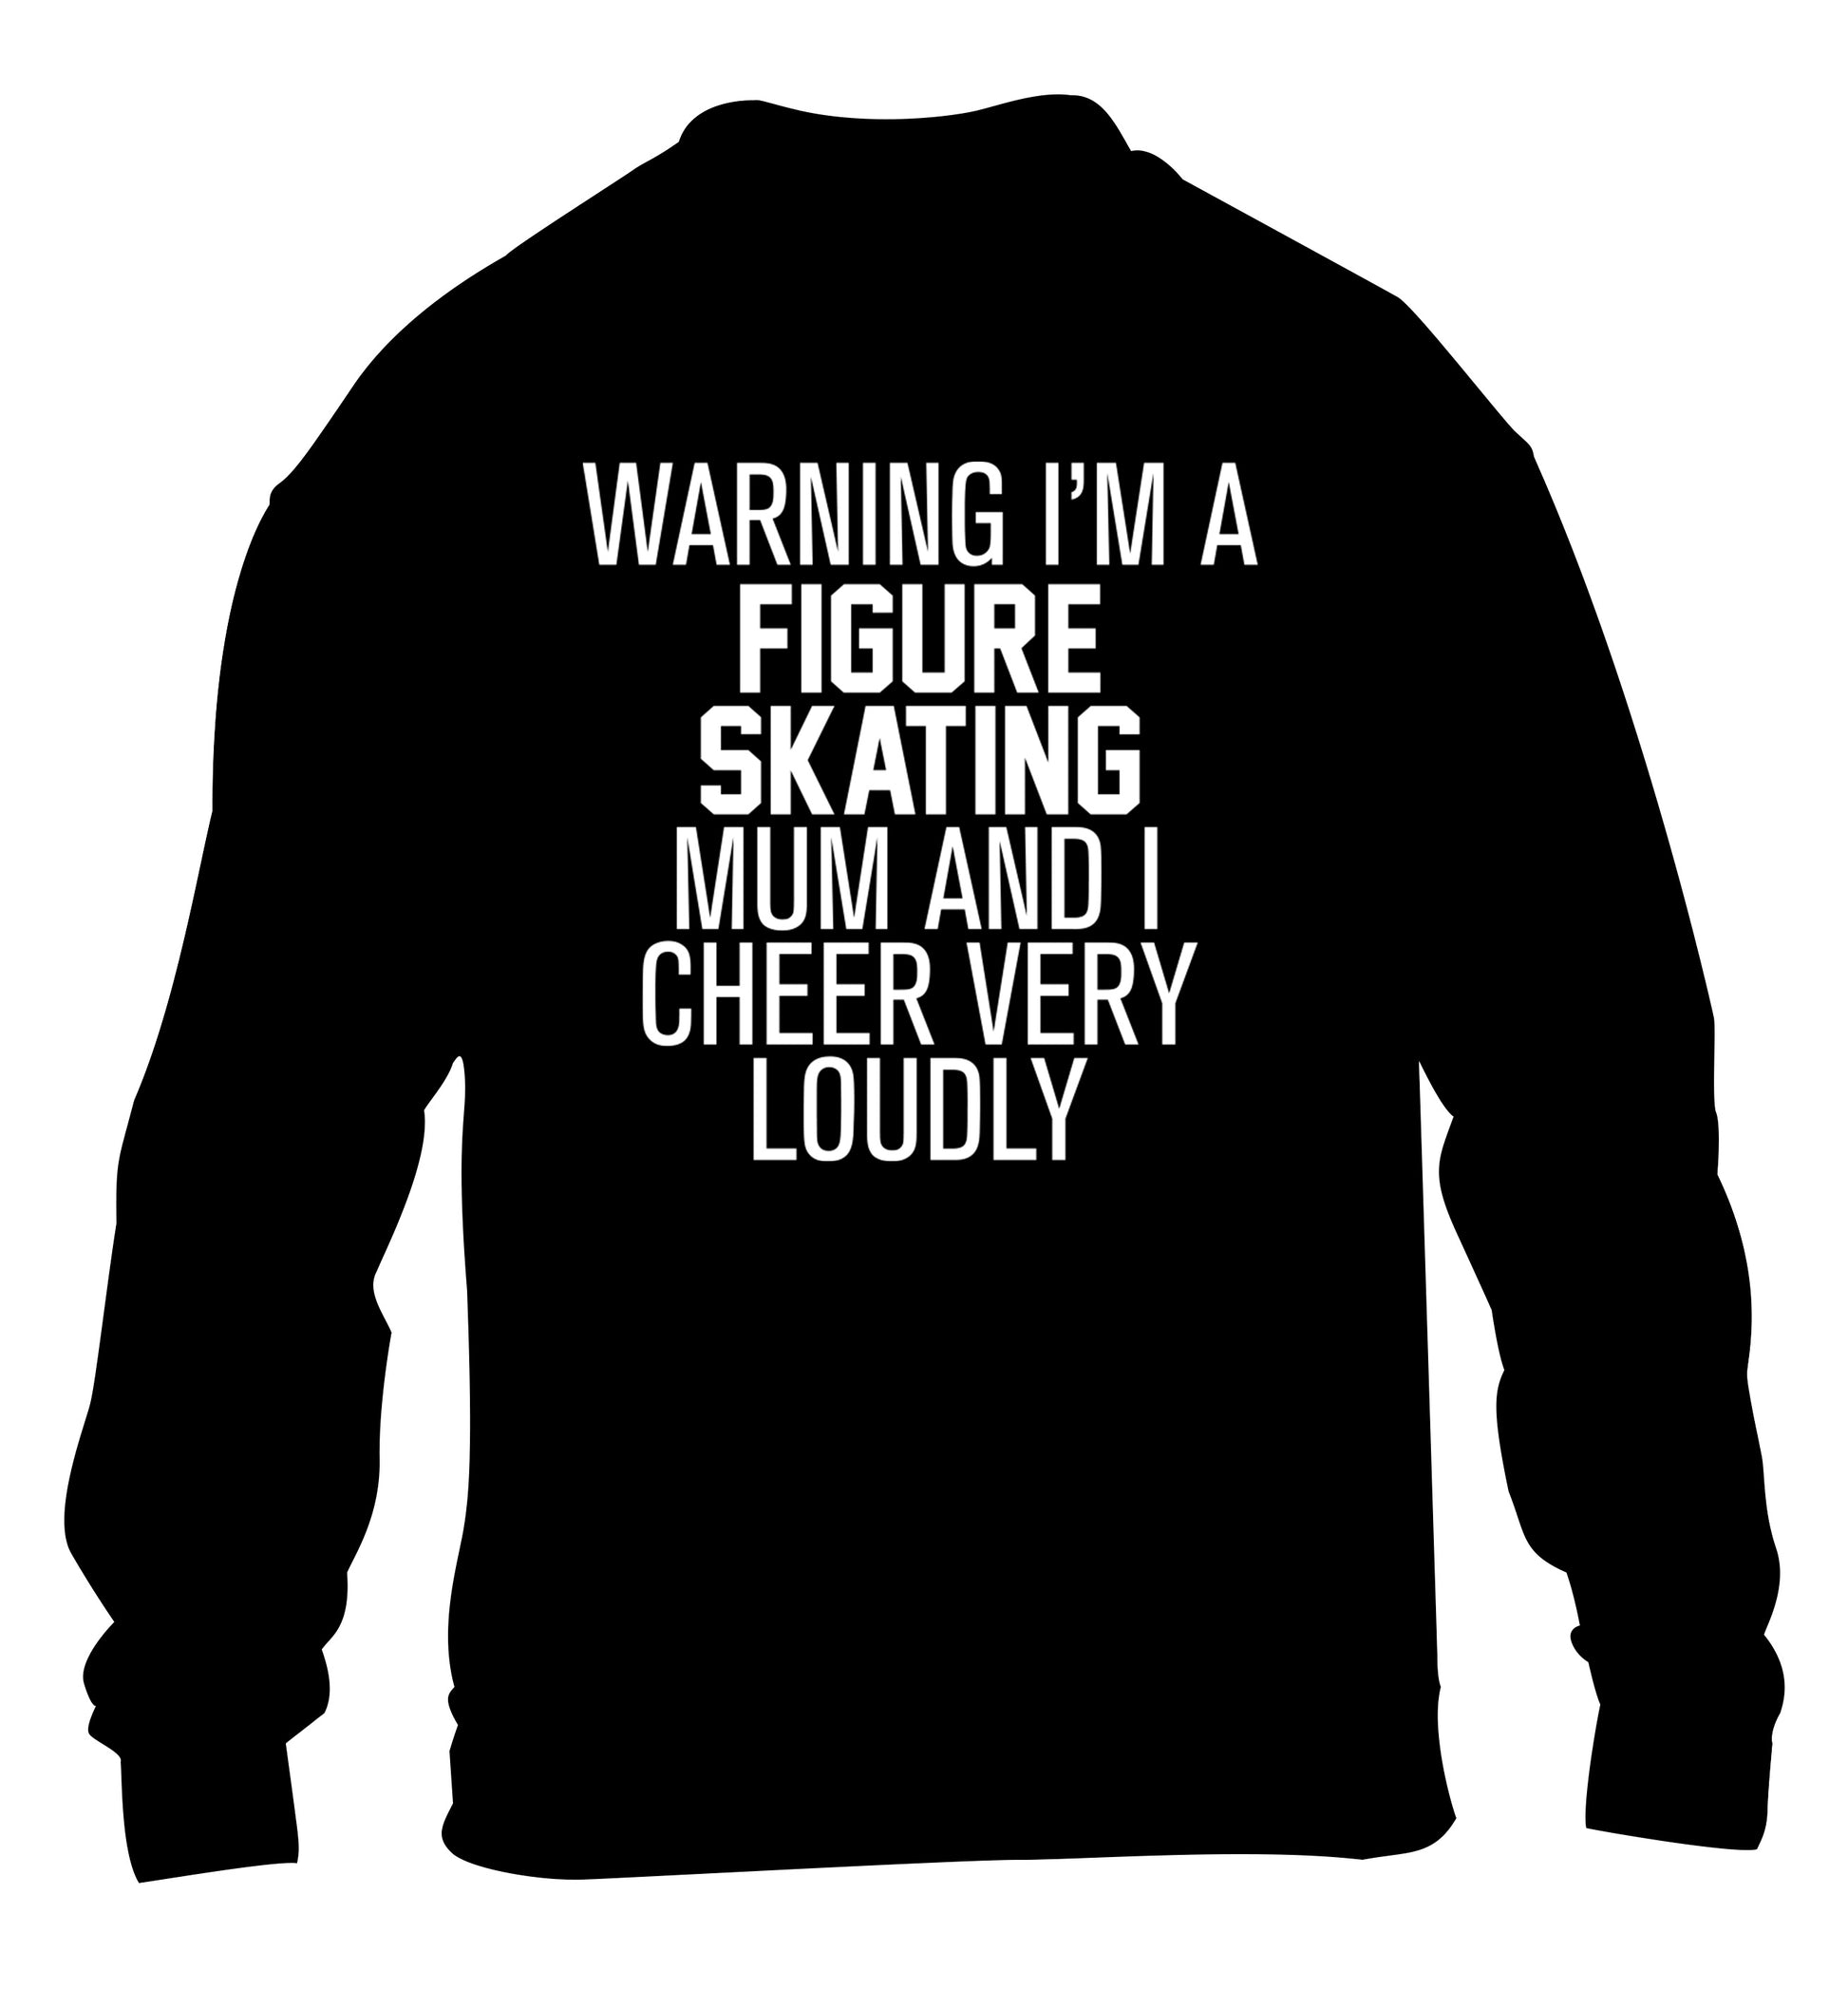 Warning I'm a figure skating mum and I cheer very loudly children's black sweater 12-14 Years